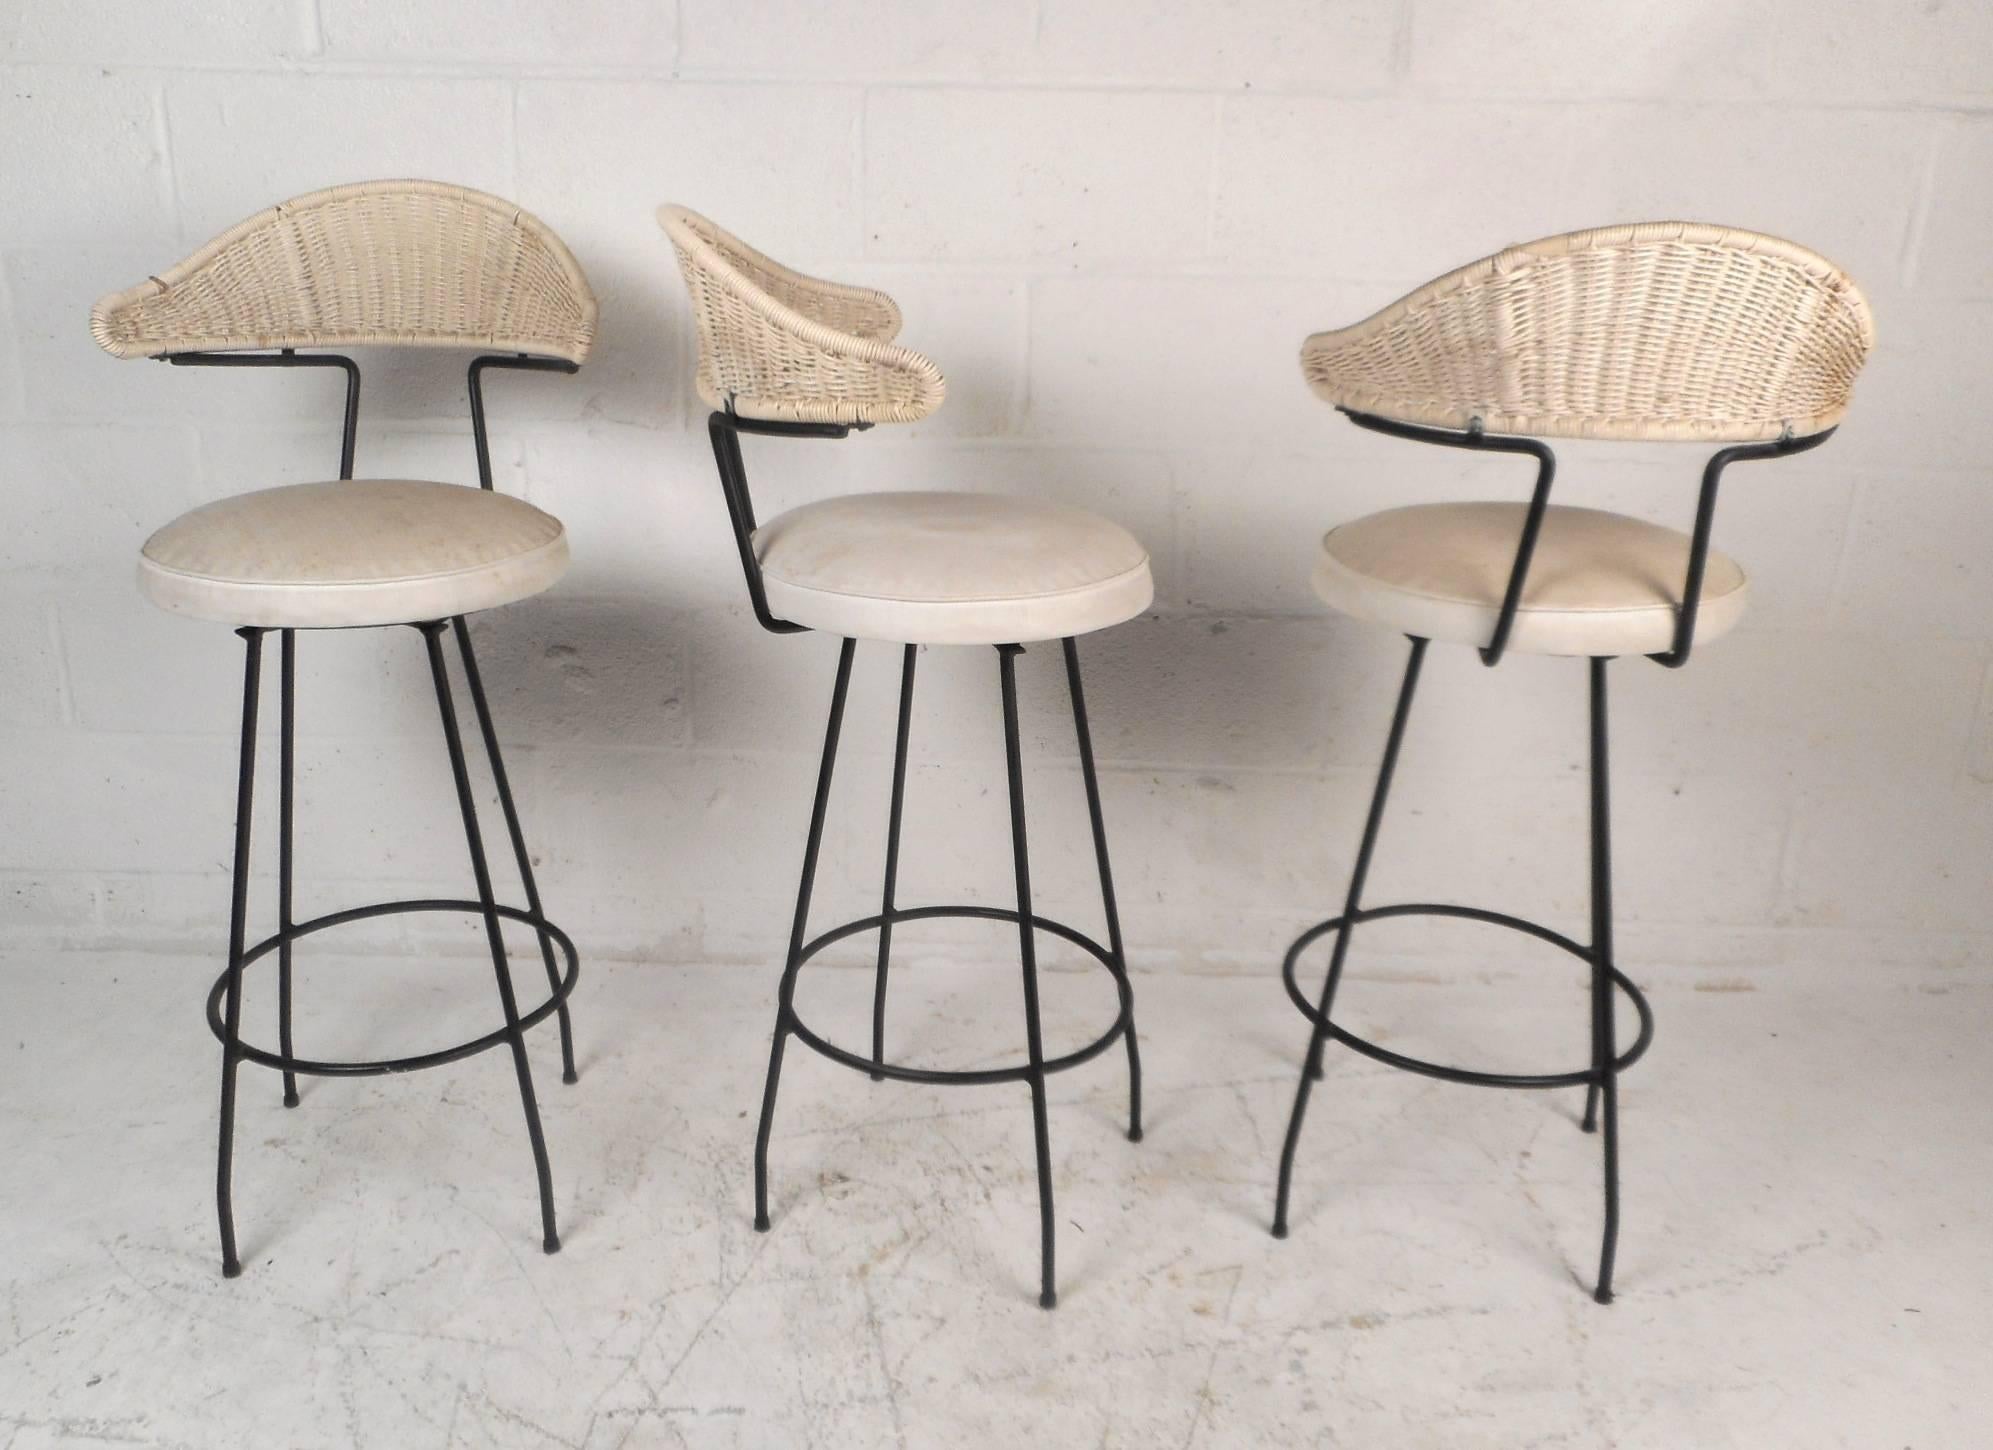 This gorgeous set of three bar stools feature unique curved woven back rests and a wrought iron base. Stylish design with thick padded seating covered in soft white fabric ensuring maximum comfort. This versatile set of stools make the perfect